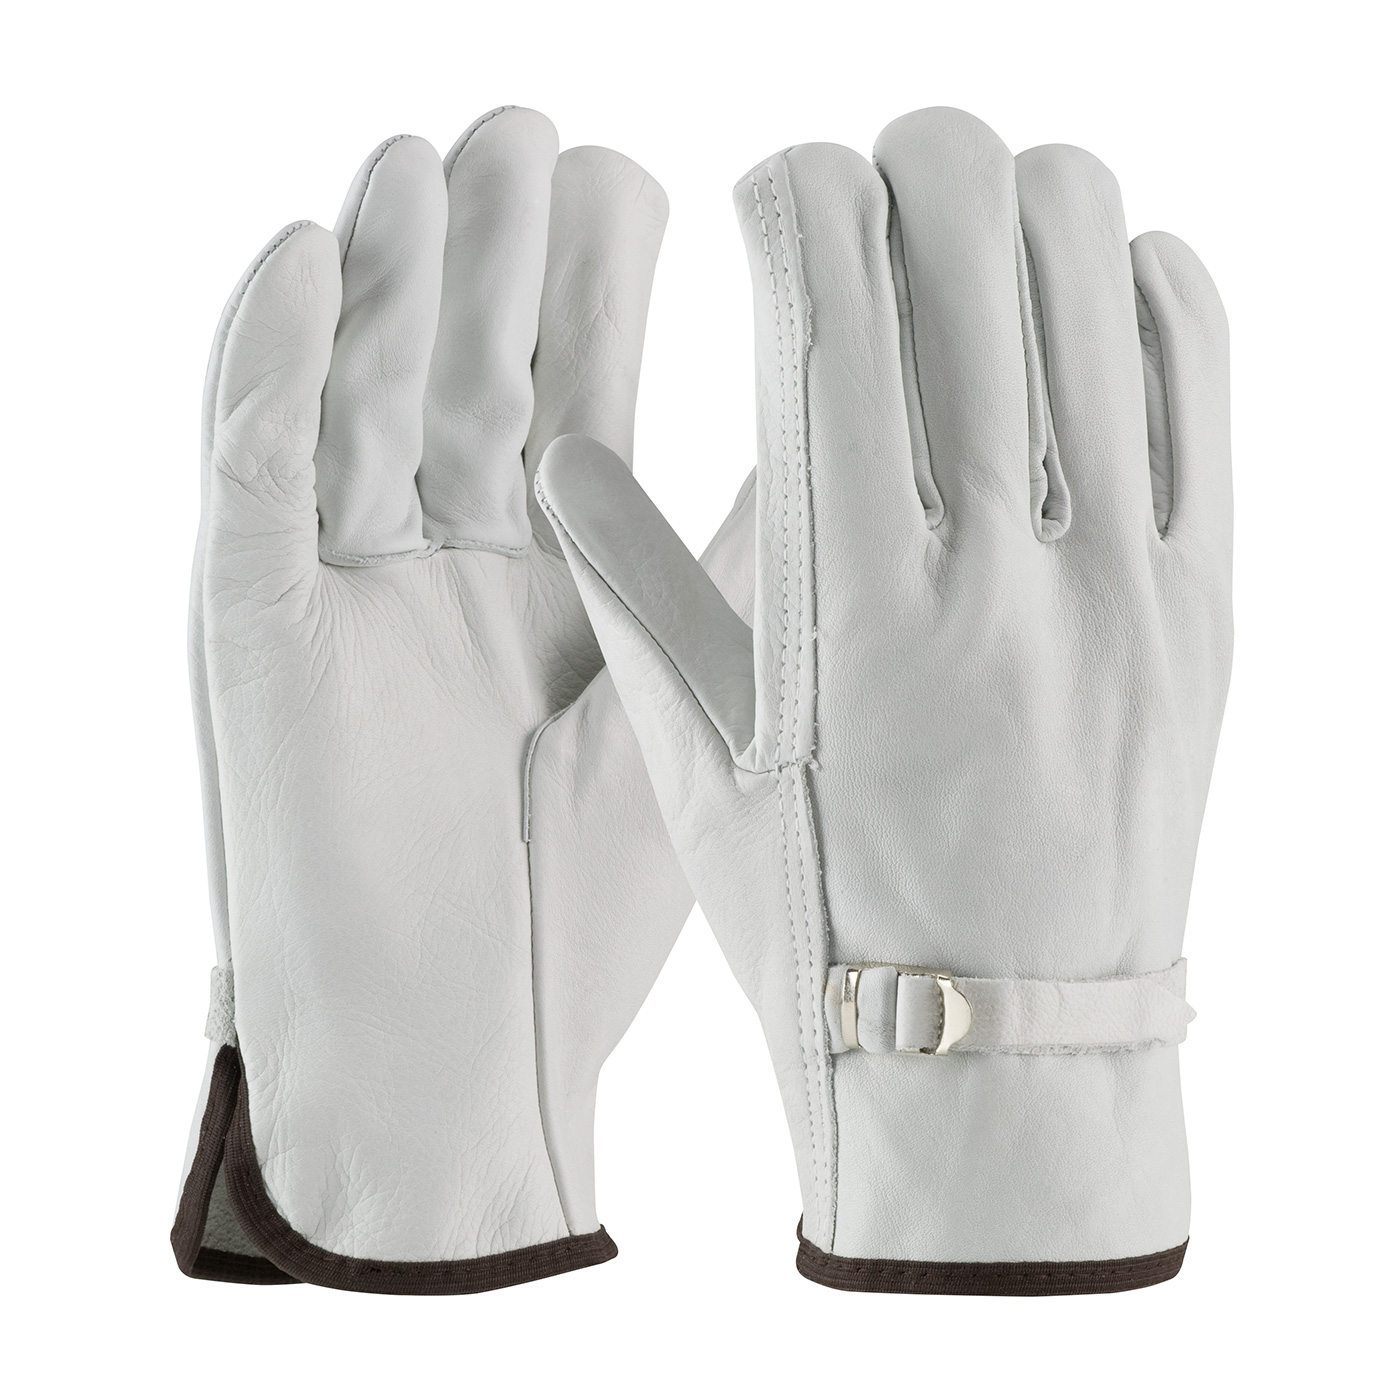 68-153 PIP® Regular-Grade Top Grain Cowhide Leather Drivers Glove w/ Straight Thumb and Pull Strap